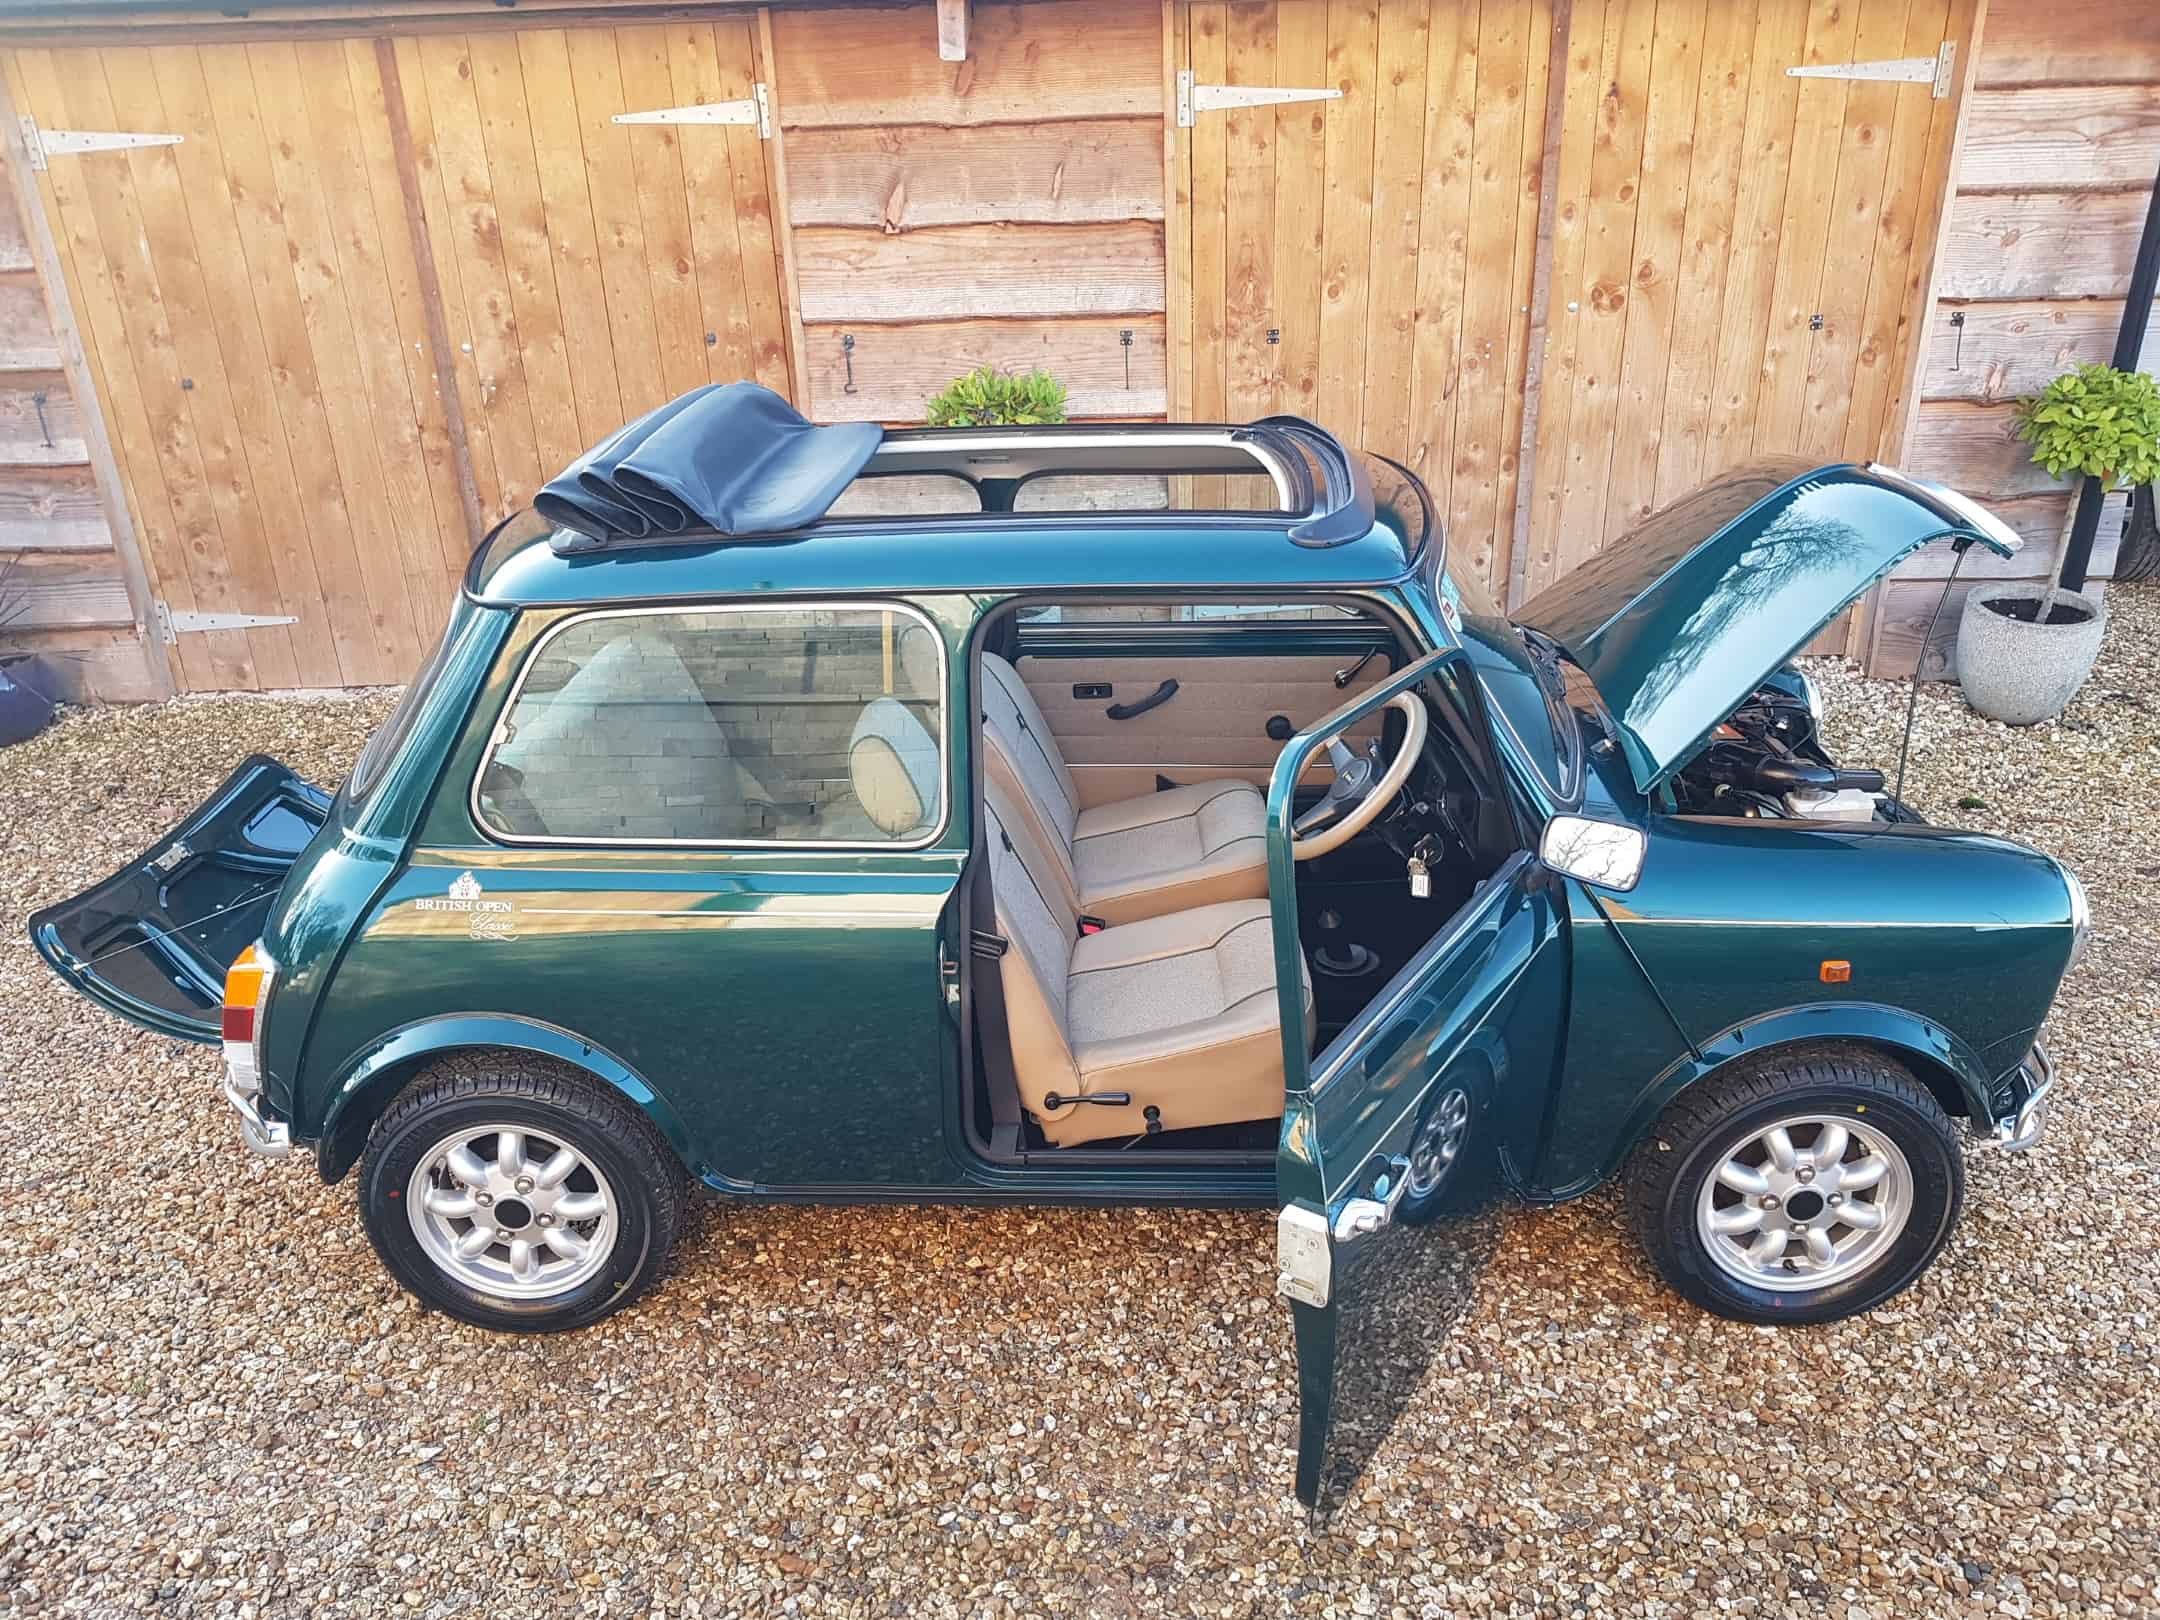 ** COMING SOON ** 1992 Limited Edition Mini British Open Classic On Just 5900 Miles From New!